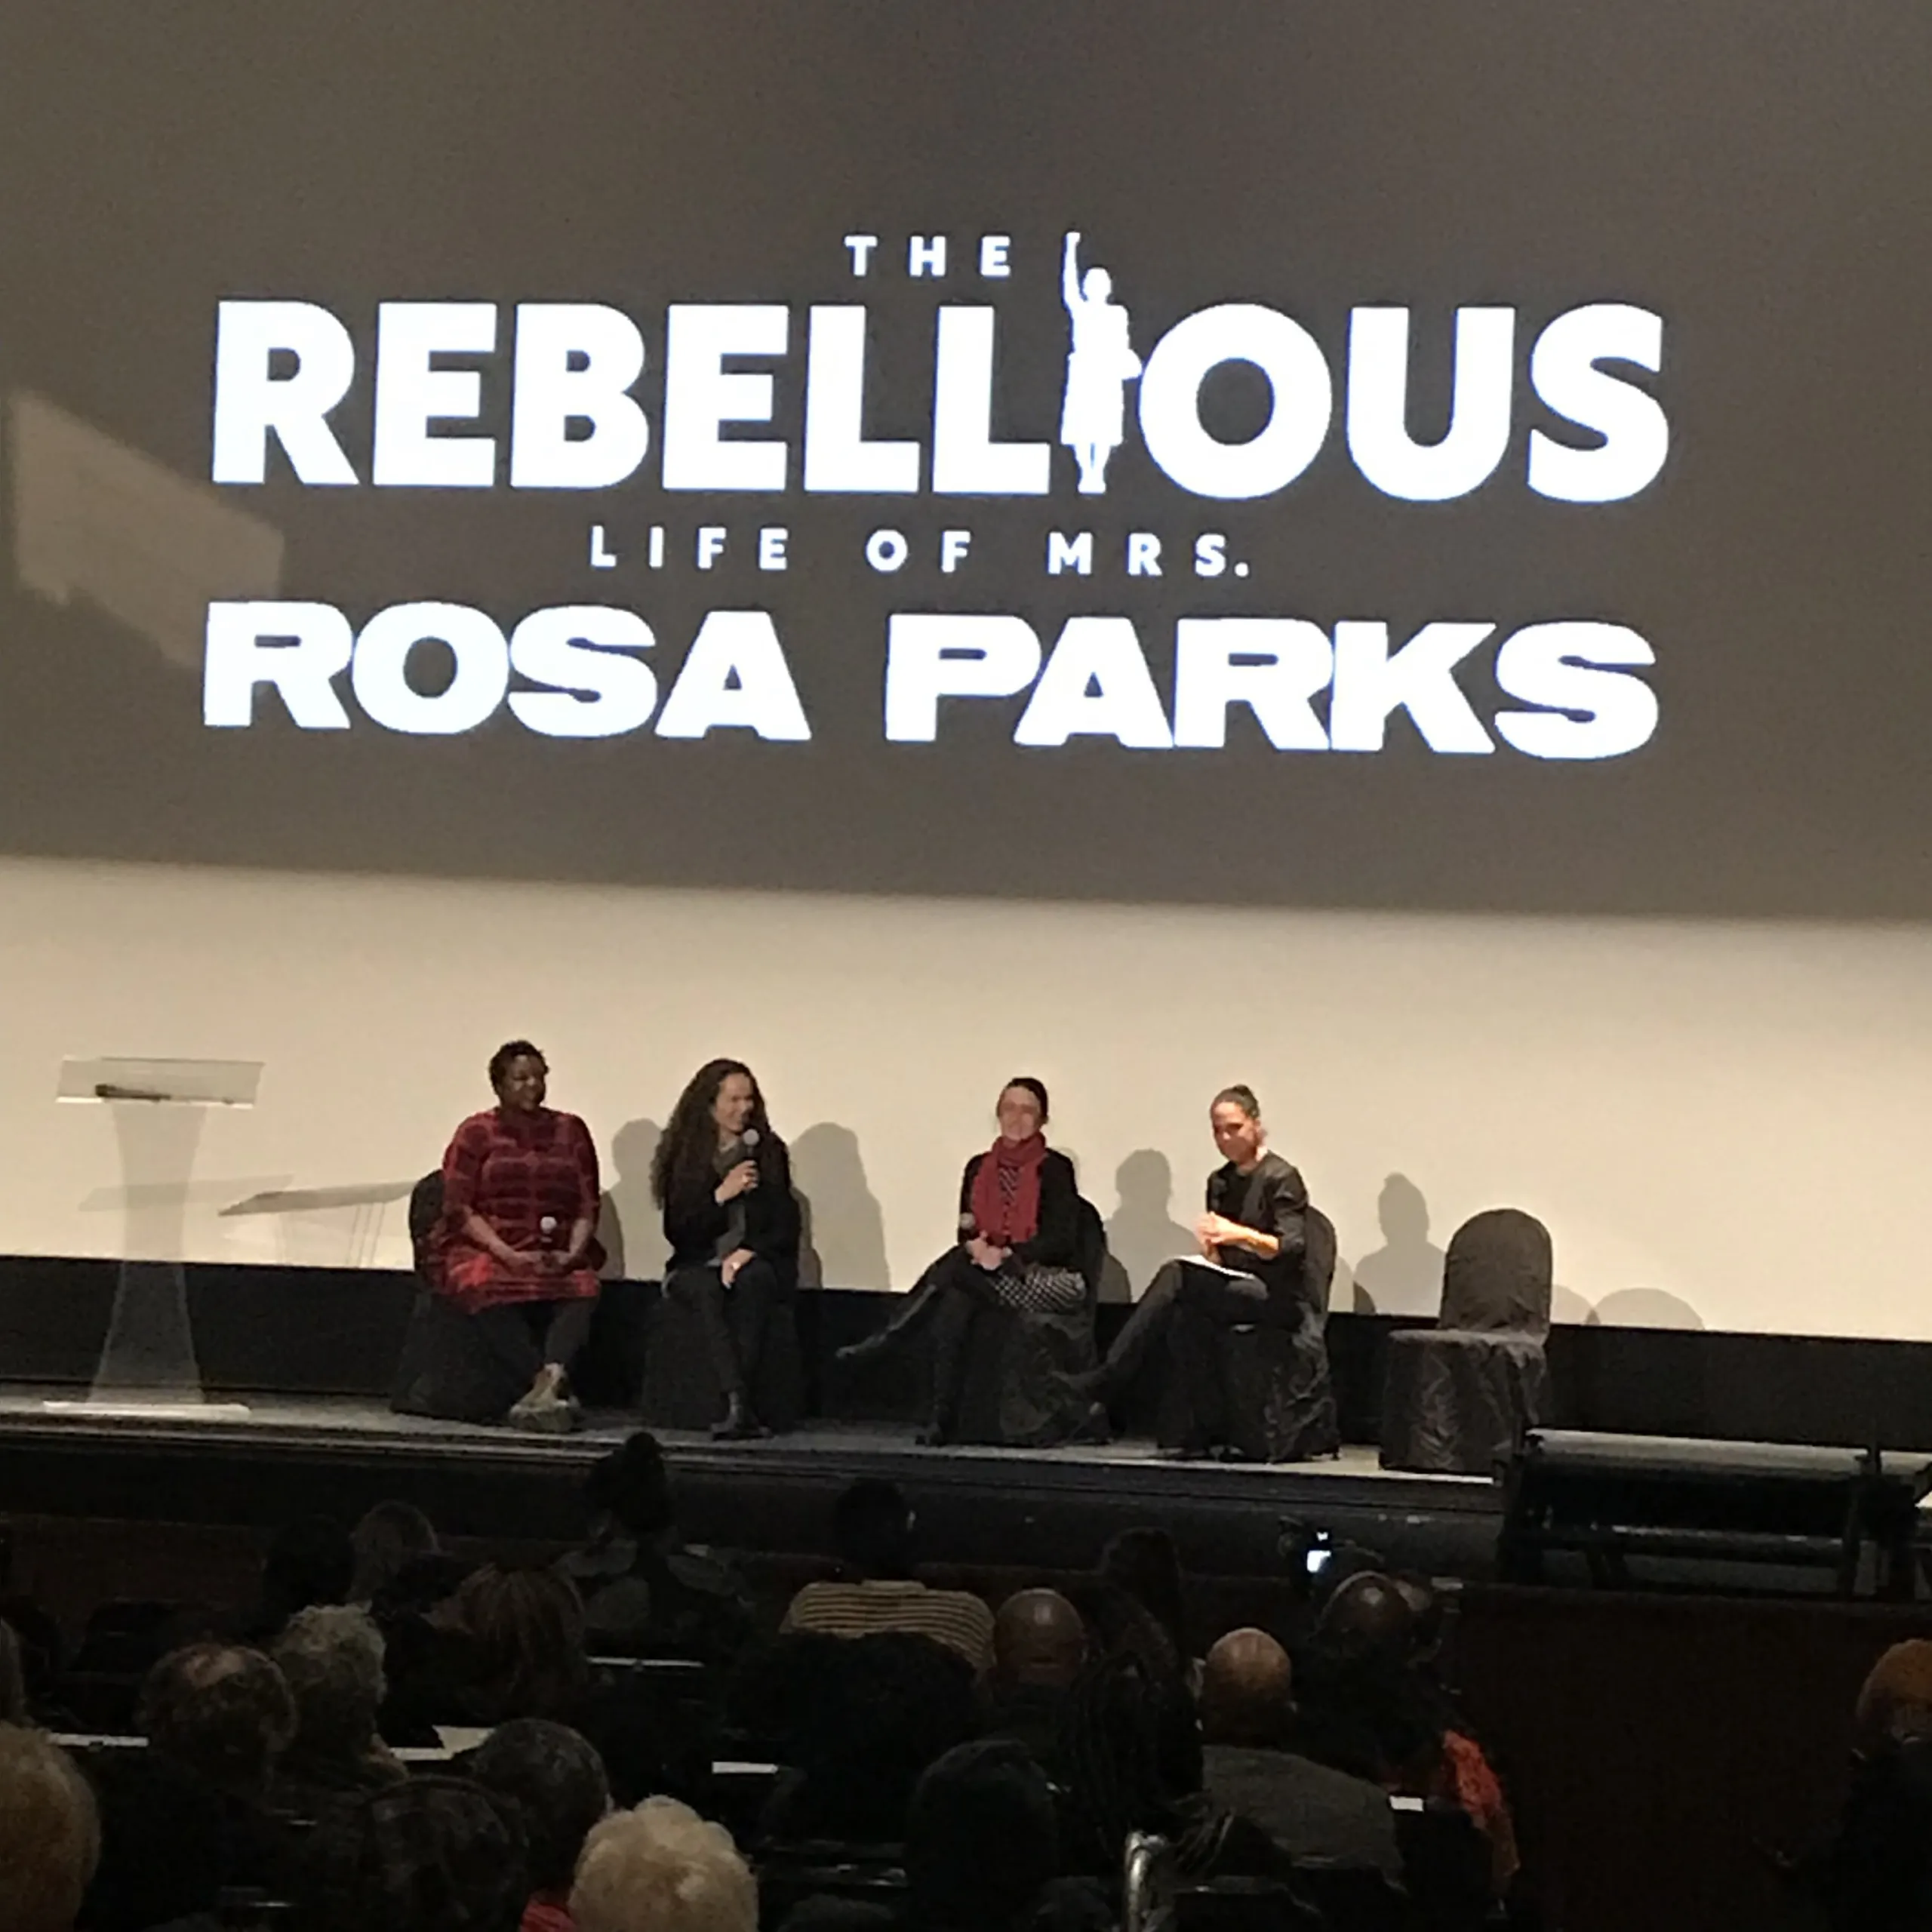 The Rebellious Life of Rosa Parks screening